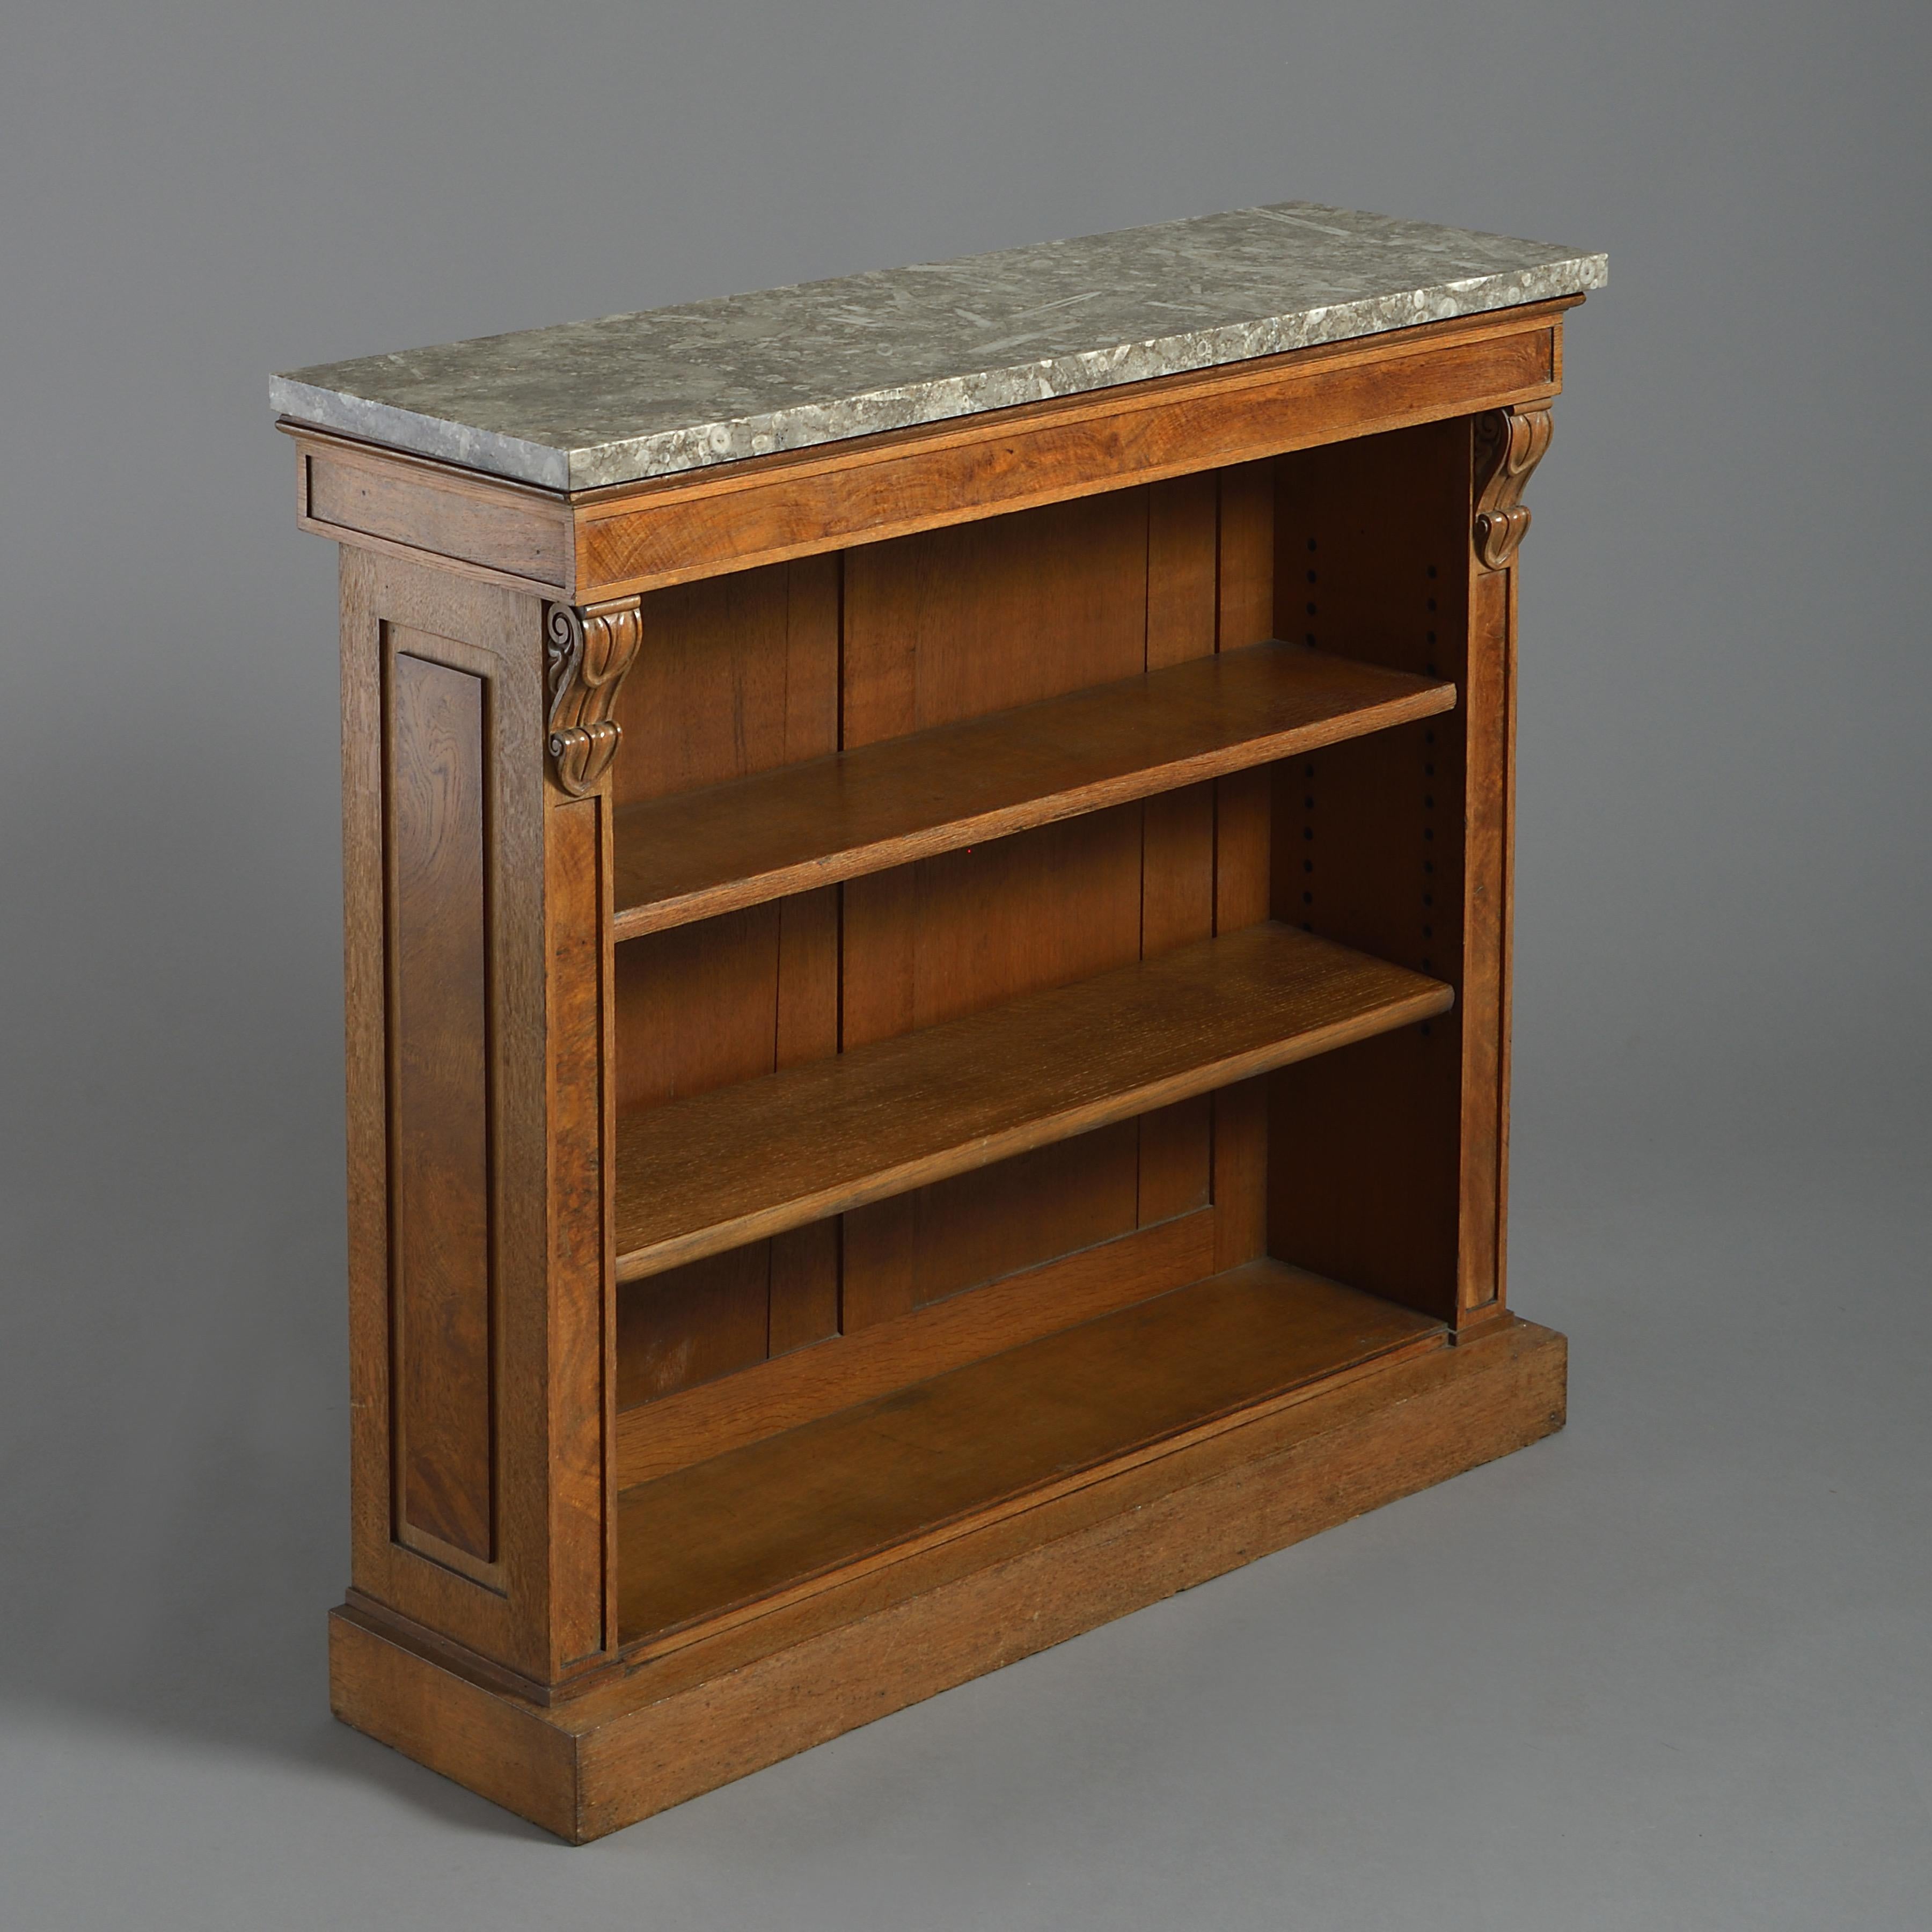 Pair of George IV oak and pollard oak bookcases with Derbyshire fossil marble tops, circa 1830.